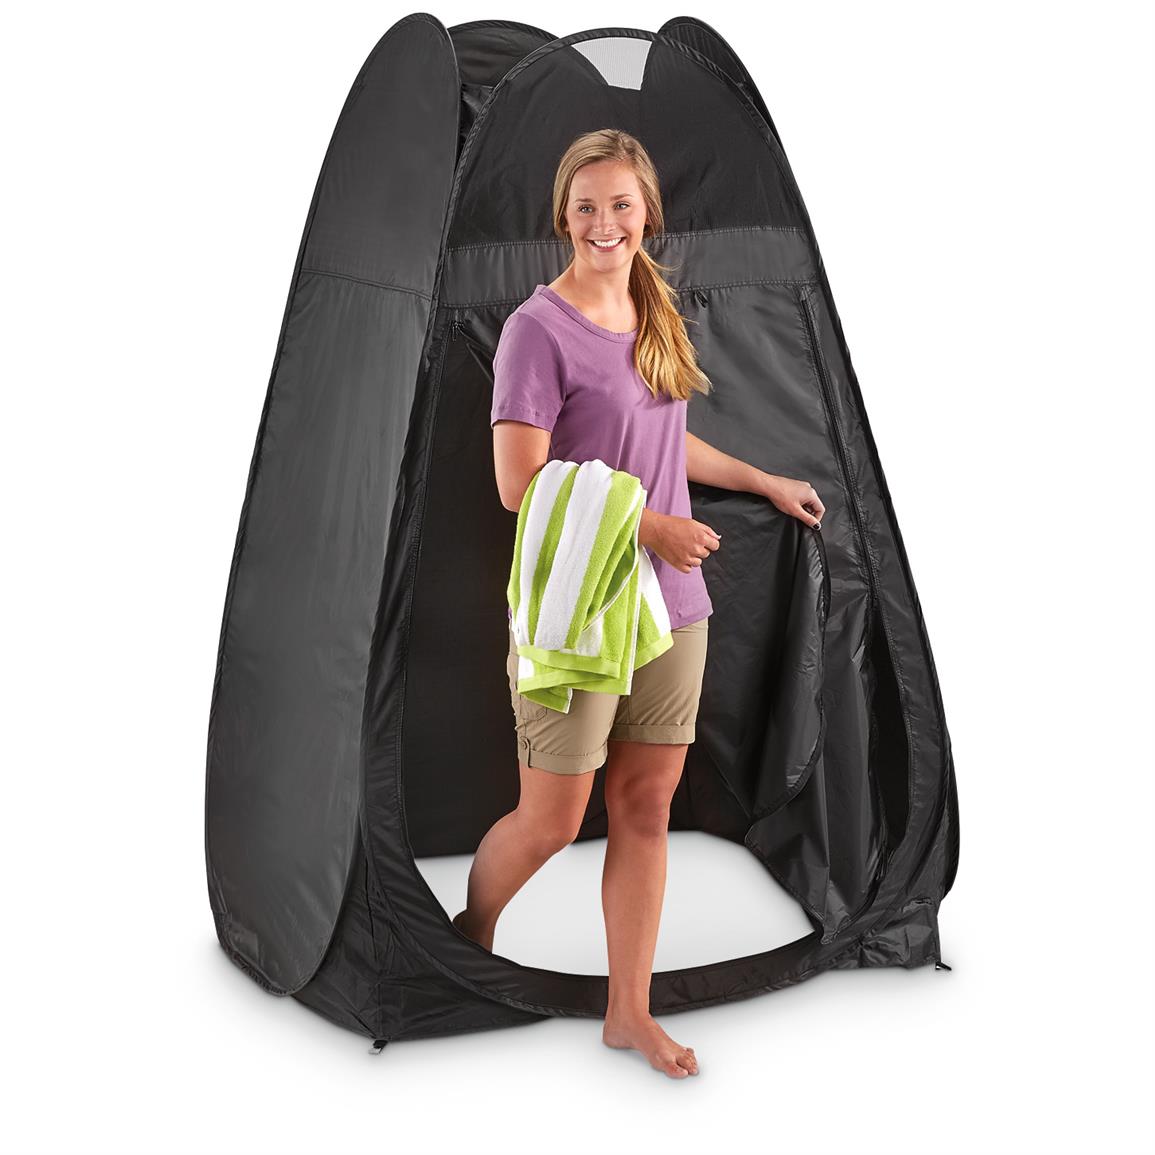 Guide Gear Pop-up Privacy Shelter, Black - 653060, Popup Tents at ...